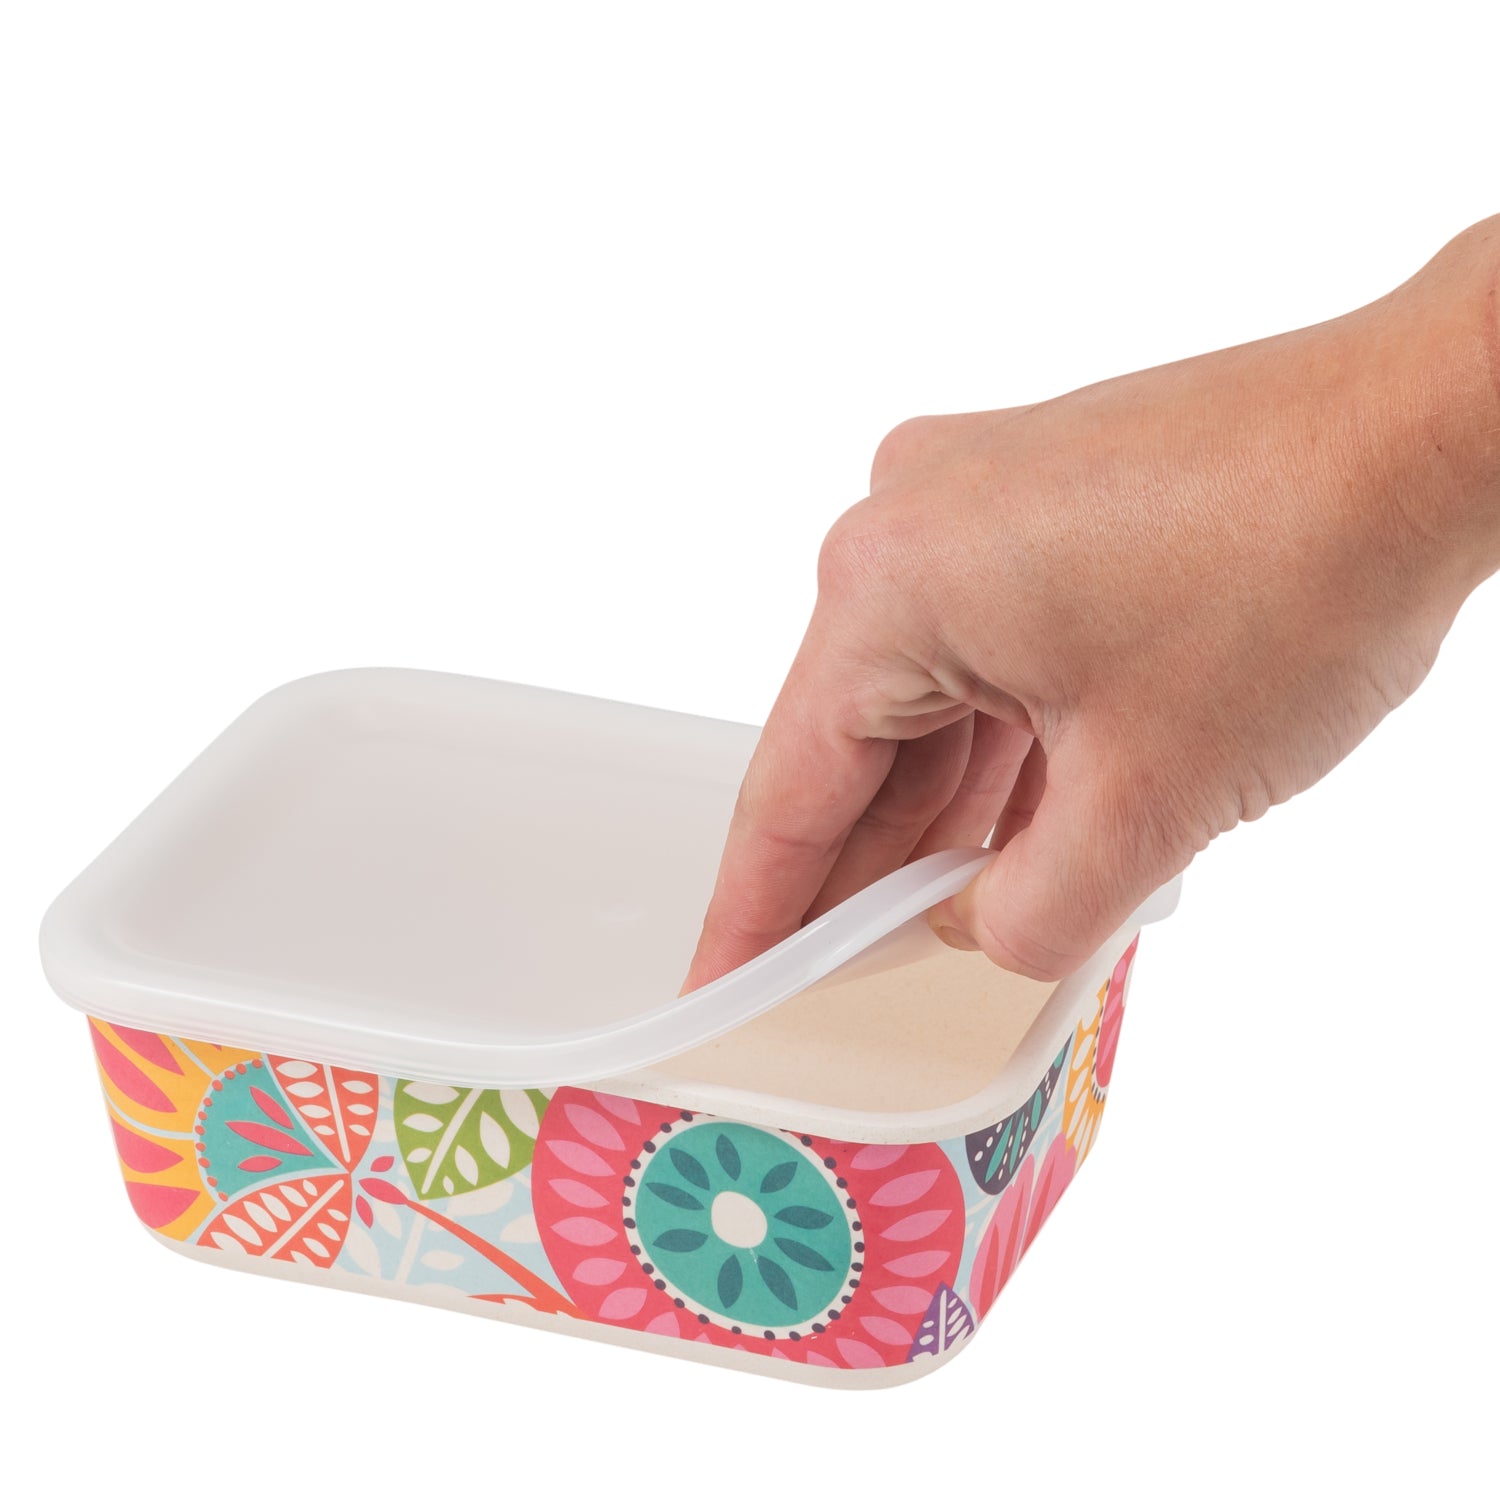 Reusable food containers and food safety